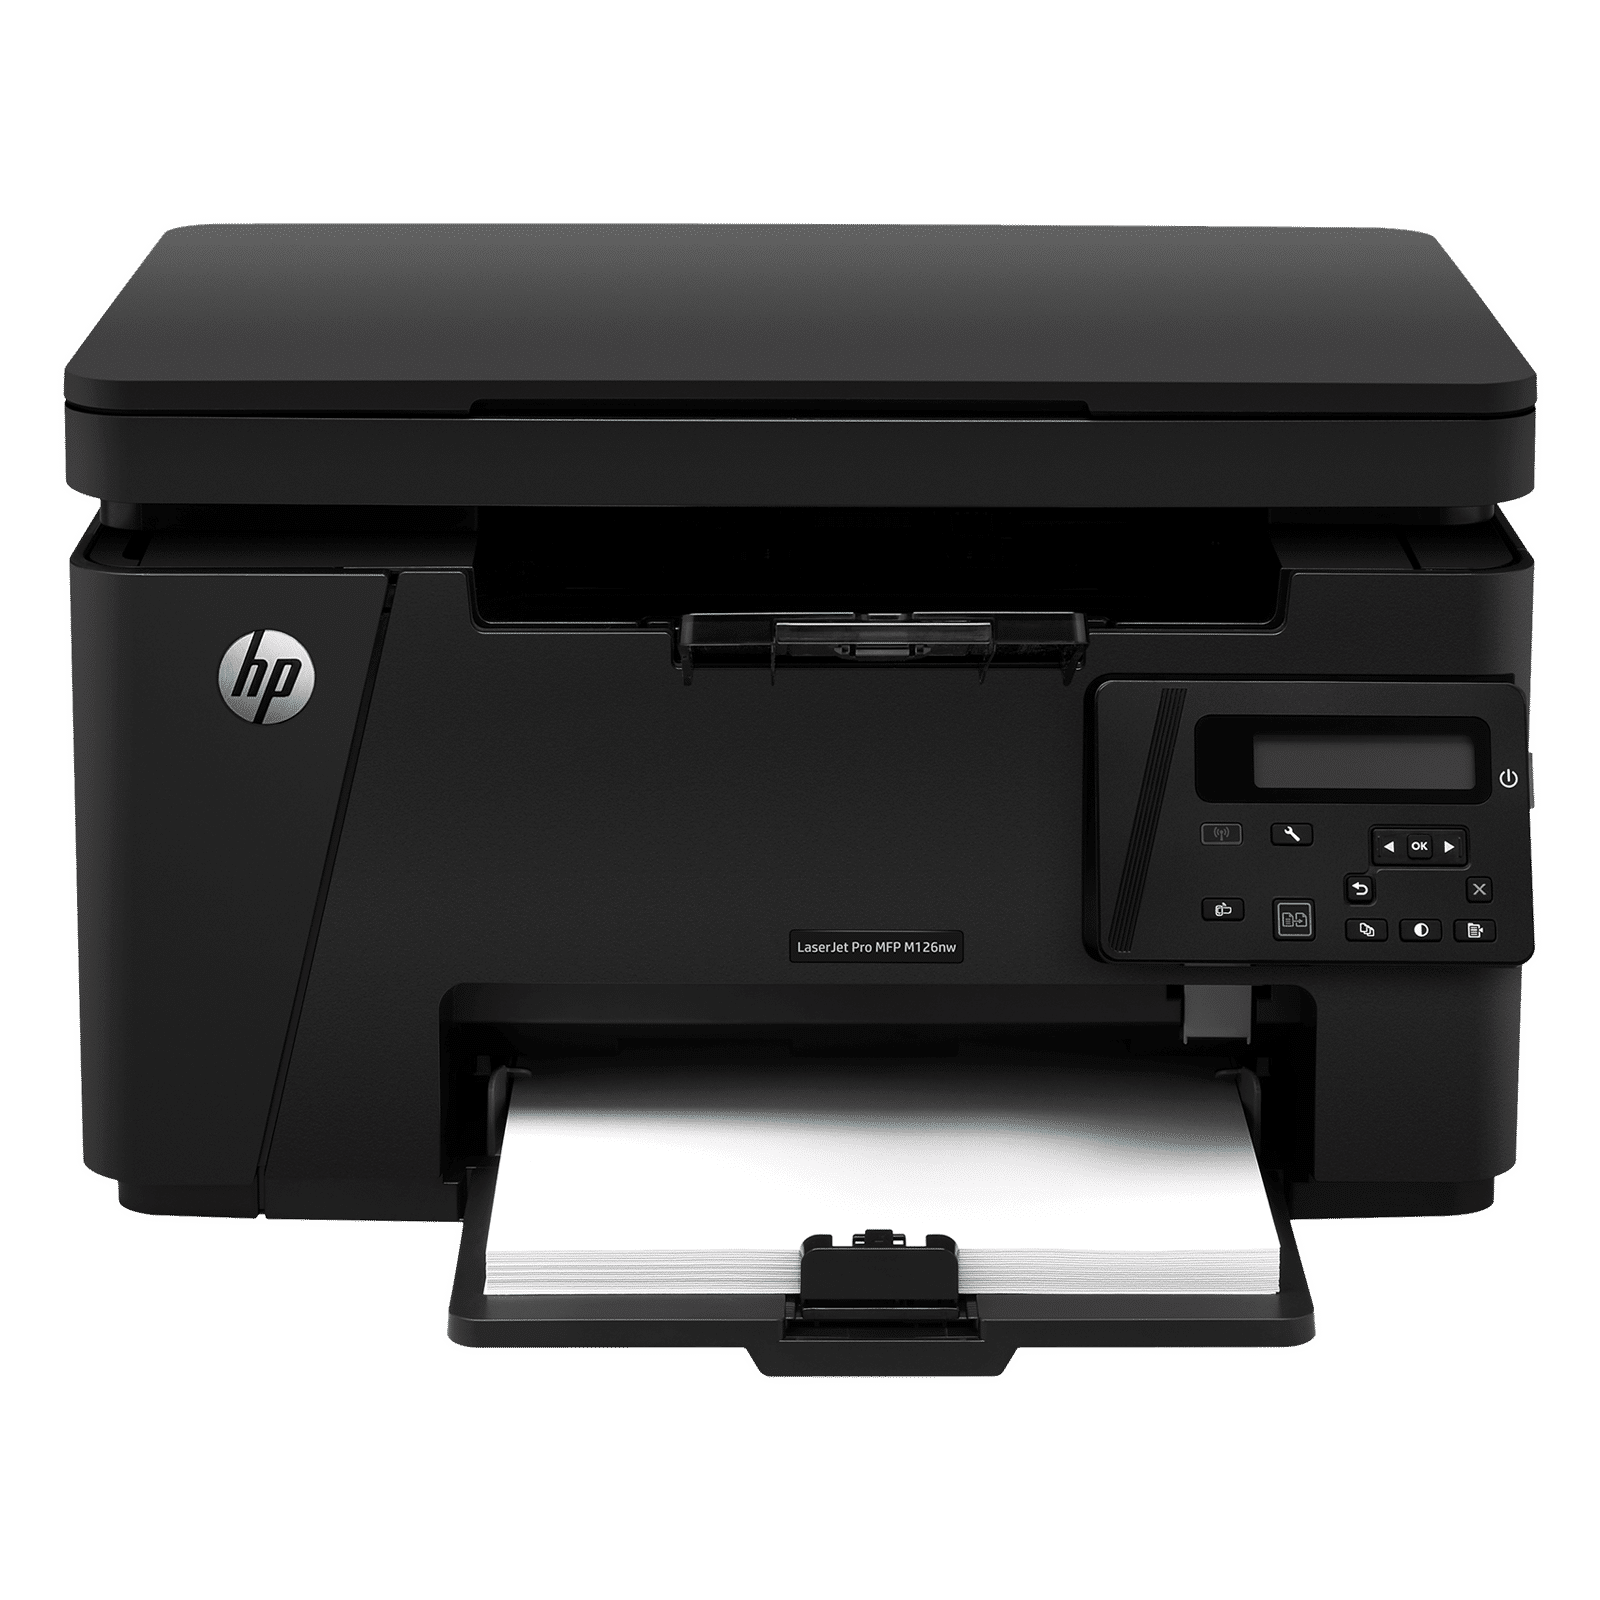 How to print on Black Paper with white ink - using laserjet Printer 